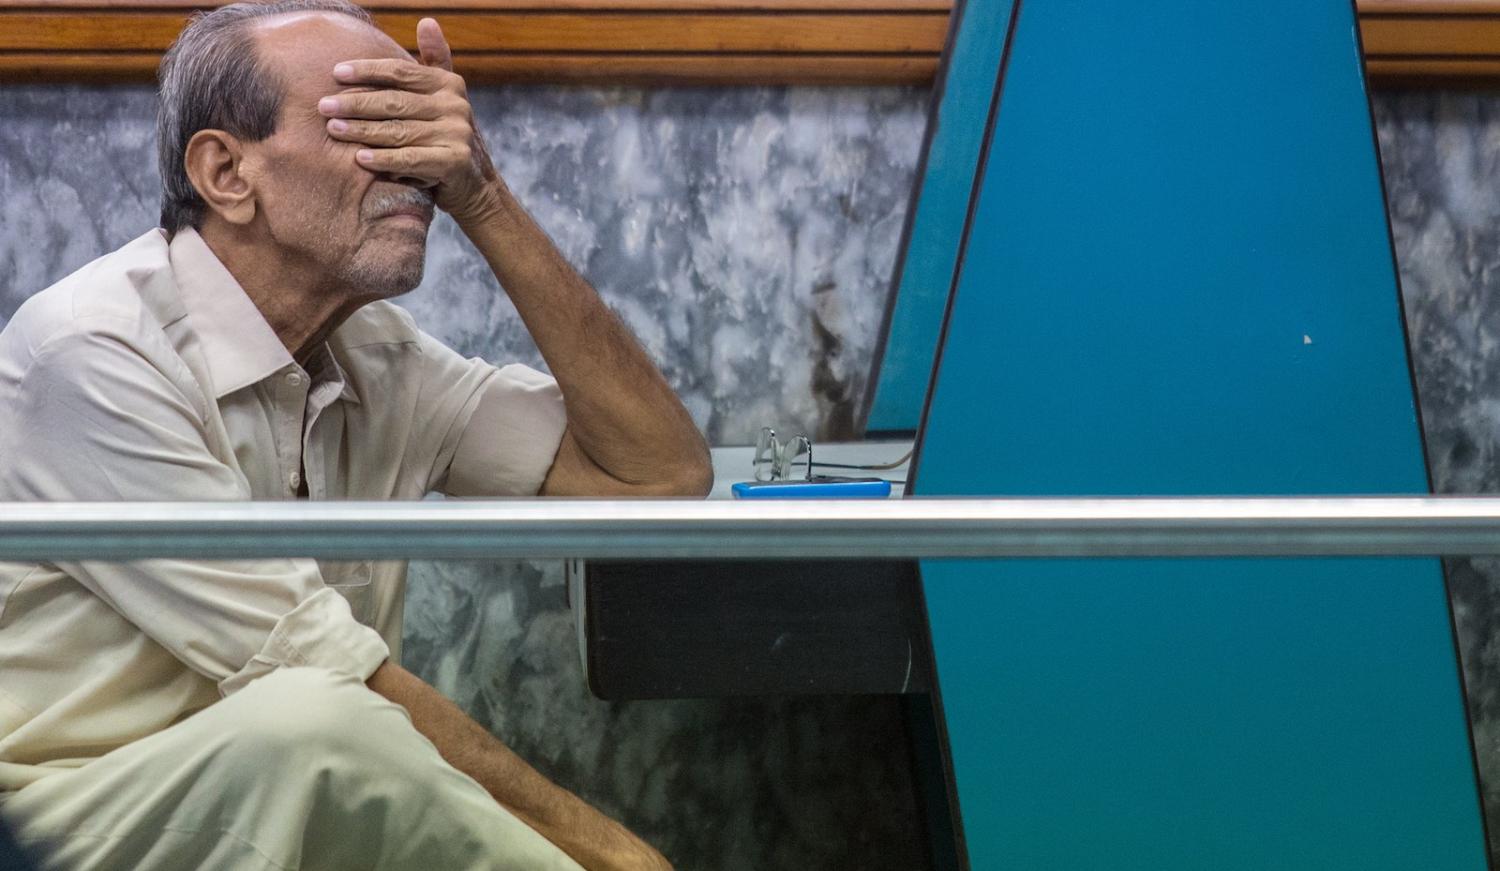 A man reacts during a trading session at the Pakistan stock exchange in Karachi, Pakistan on 9 July (Photo: Asim Hafeez via Getty)  